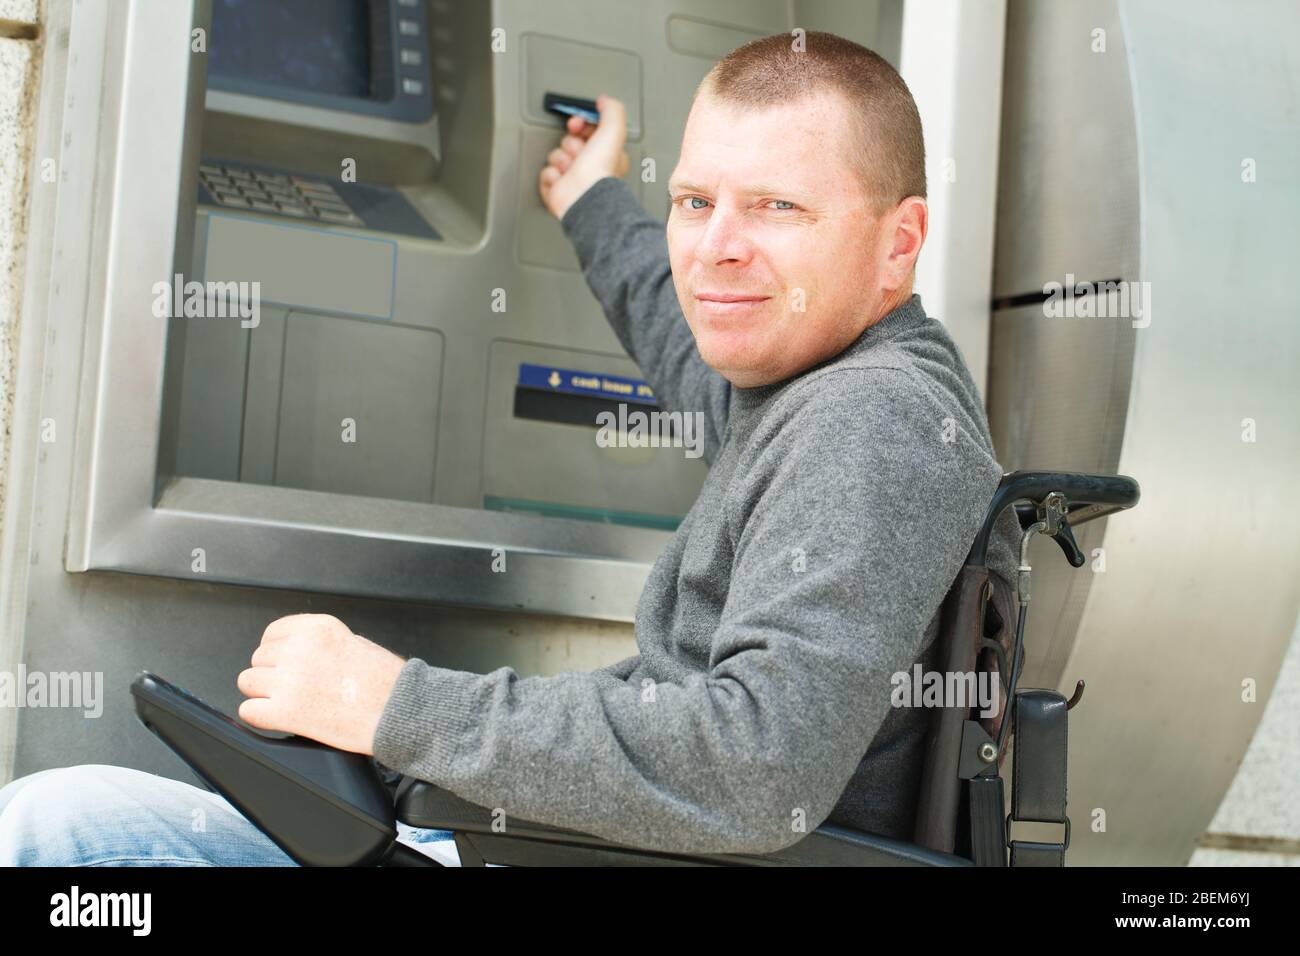 Disabled Man put his credit card at the ATM. Stock Photo